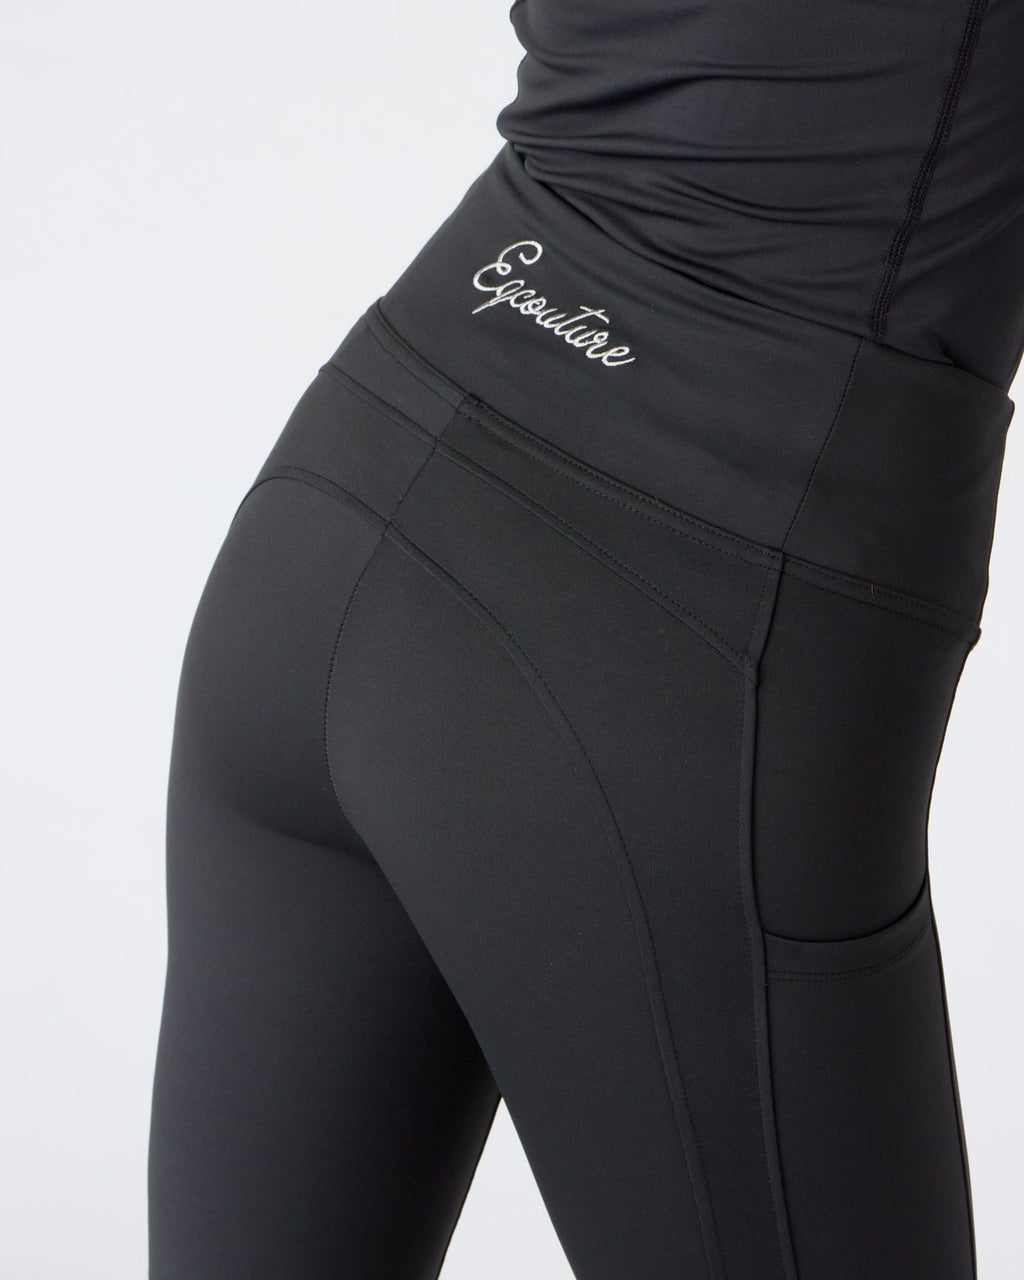 Gym / Riding Leggings / tights with phone pockets - Eqcouture GREY